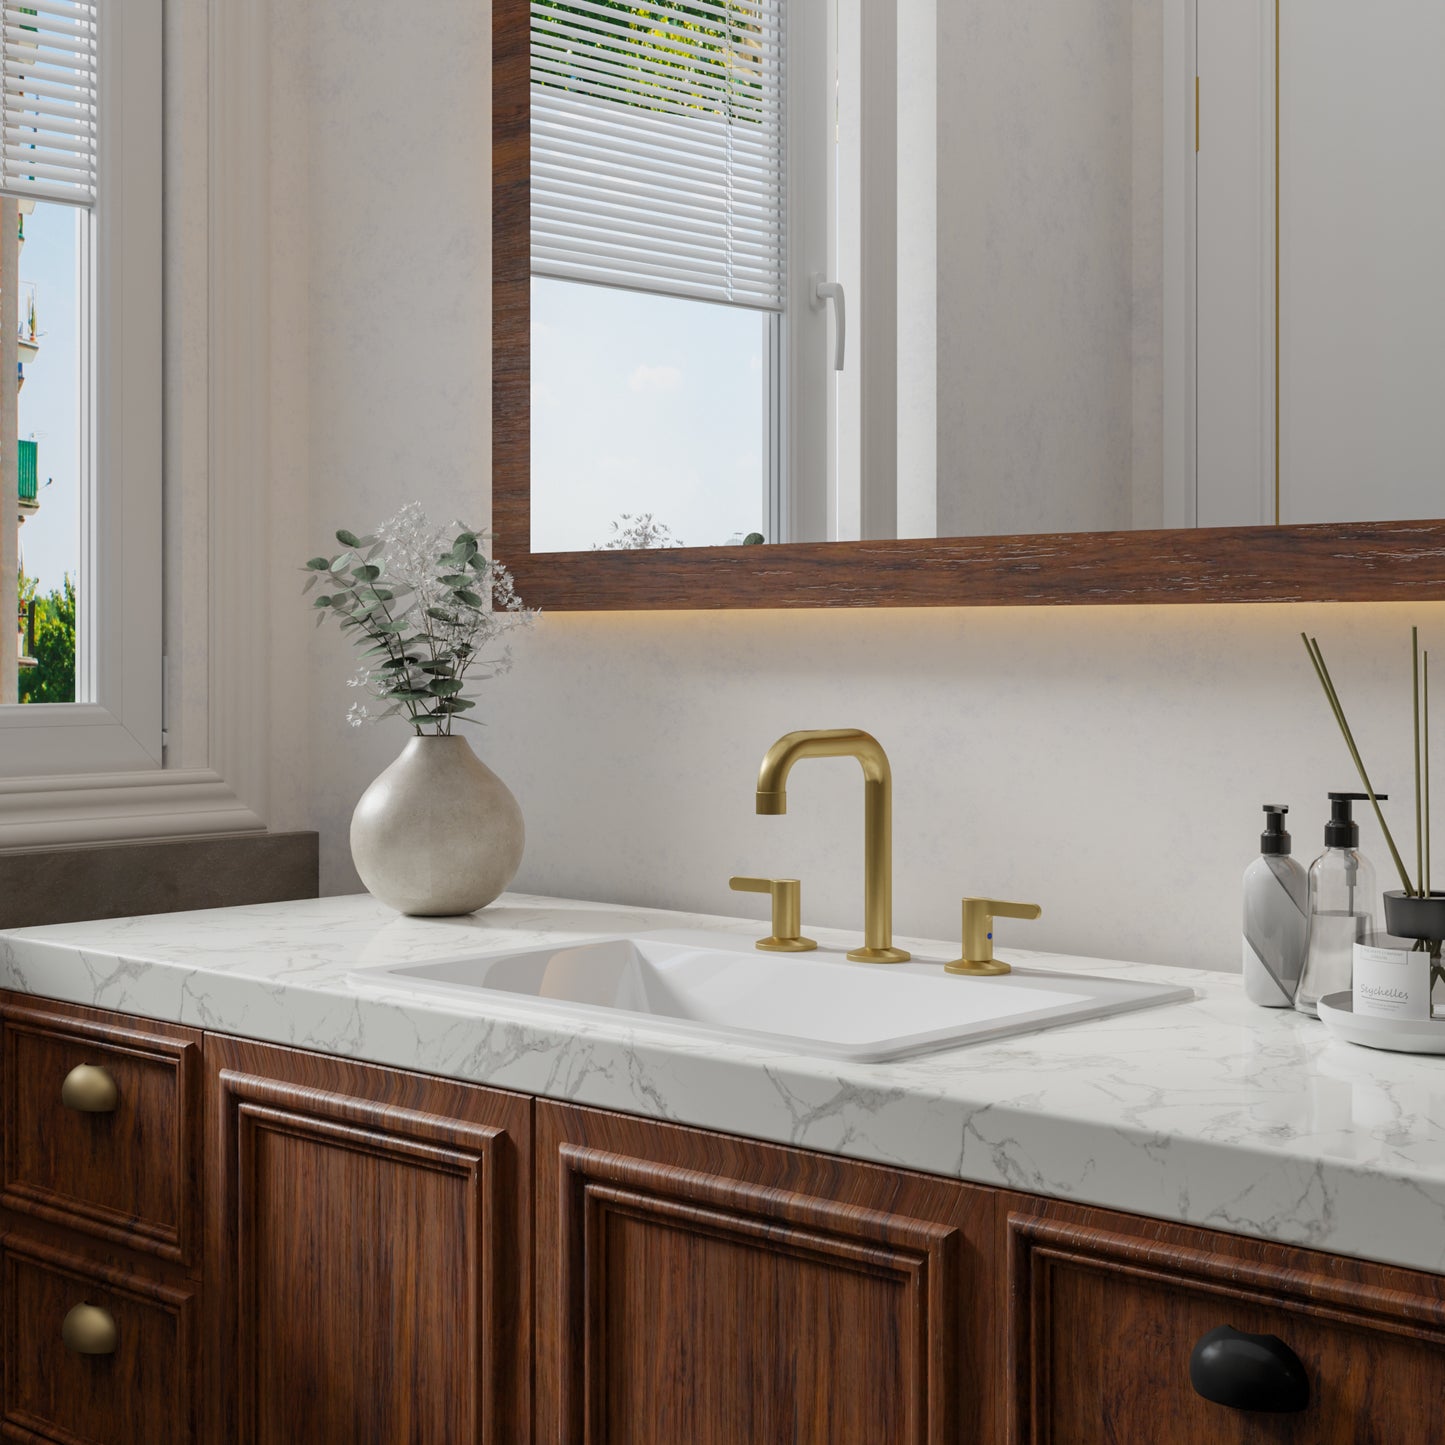 MP-21010 8''Widespread Basin Gold Faucet